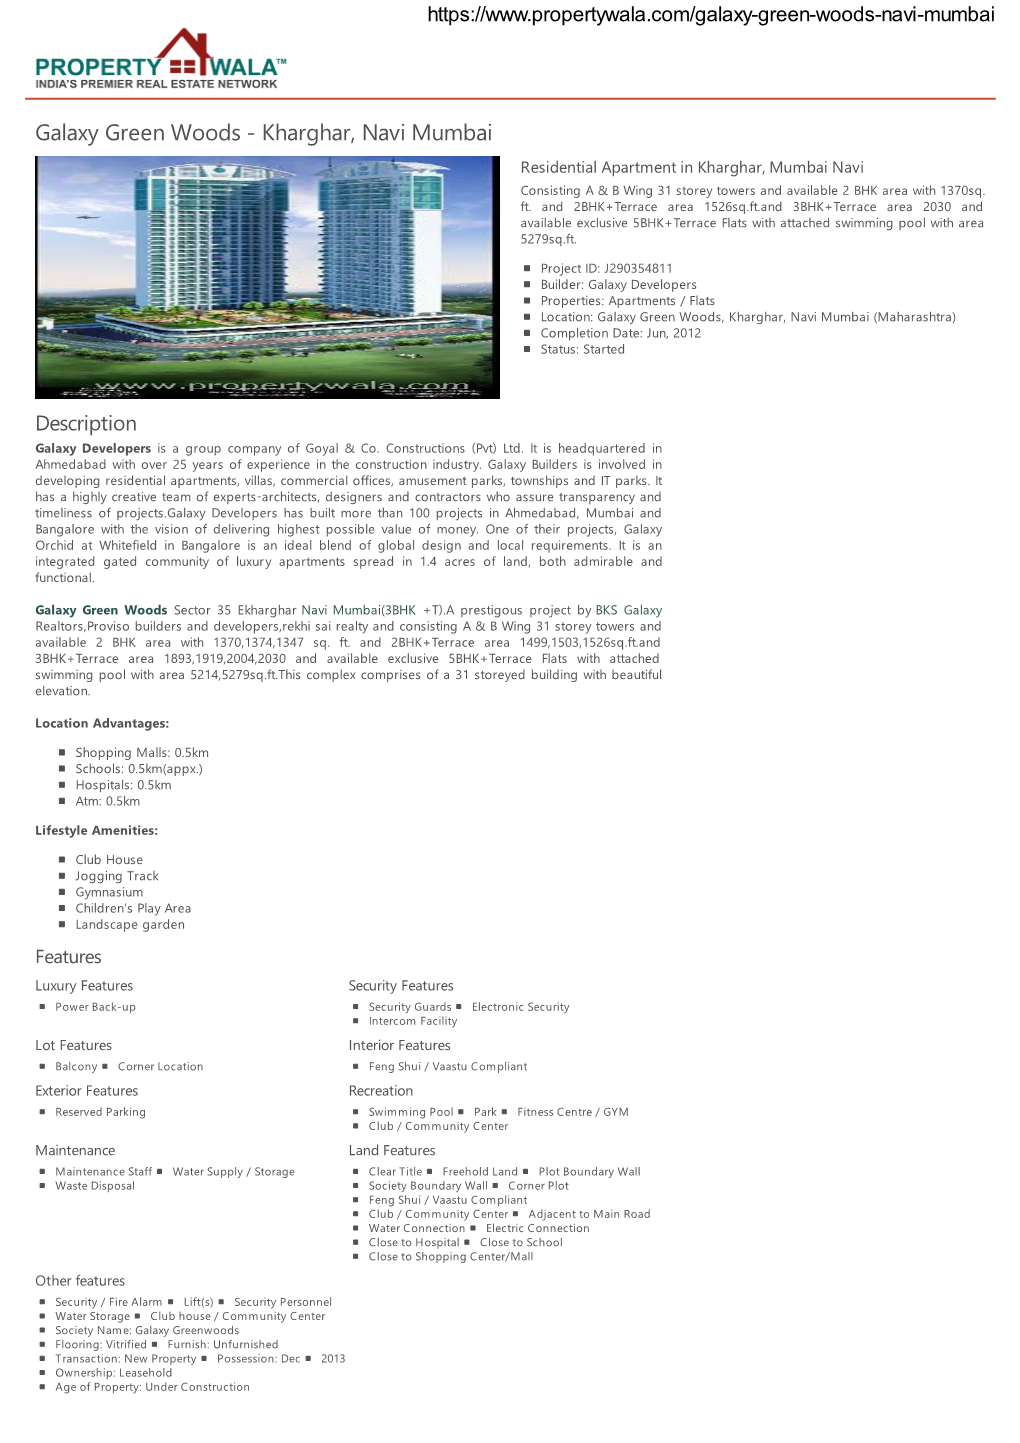 Galaxy Green Woods - Kharghar, Navi Mumbai Residential Apartment in Kharghar, Mumbai Navi Consisting a & B Wing 31 Storey Towers and Available 2 BHK Area with 1370Sq